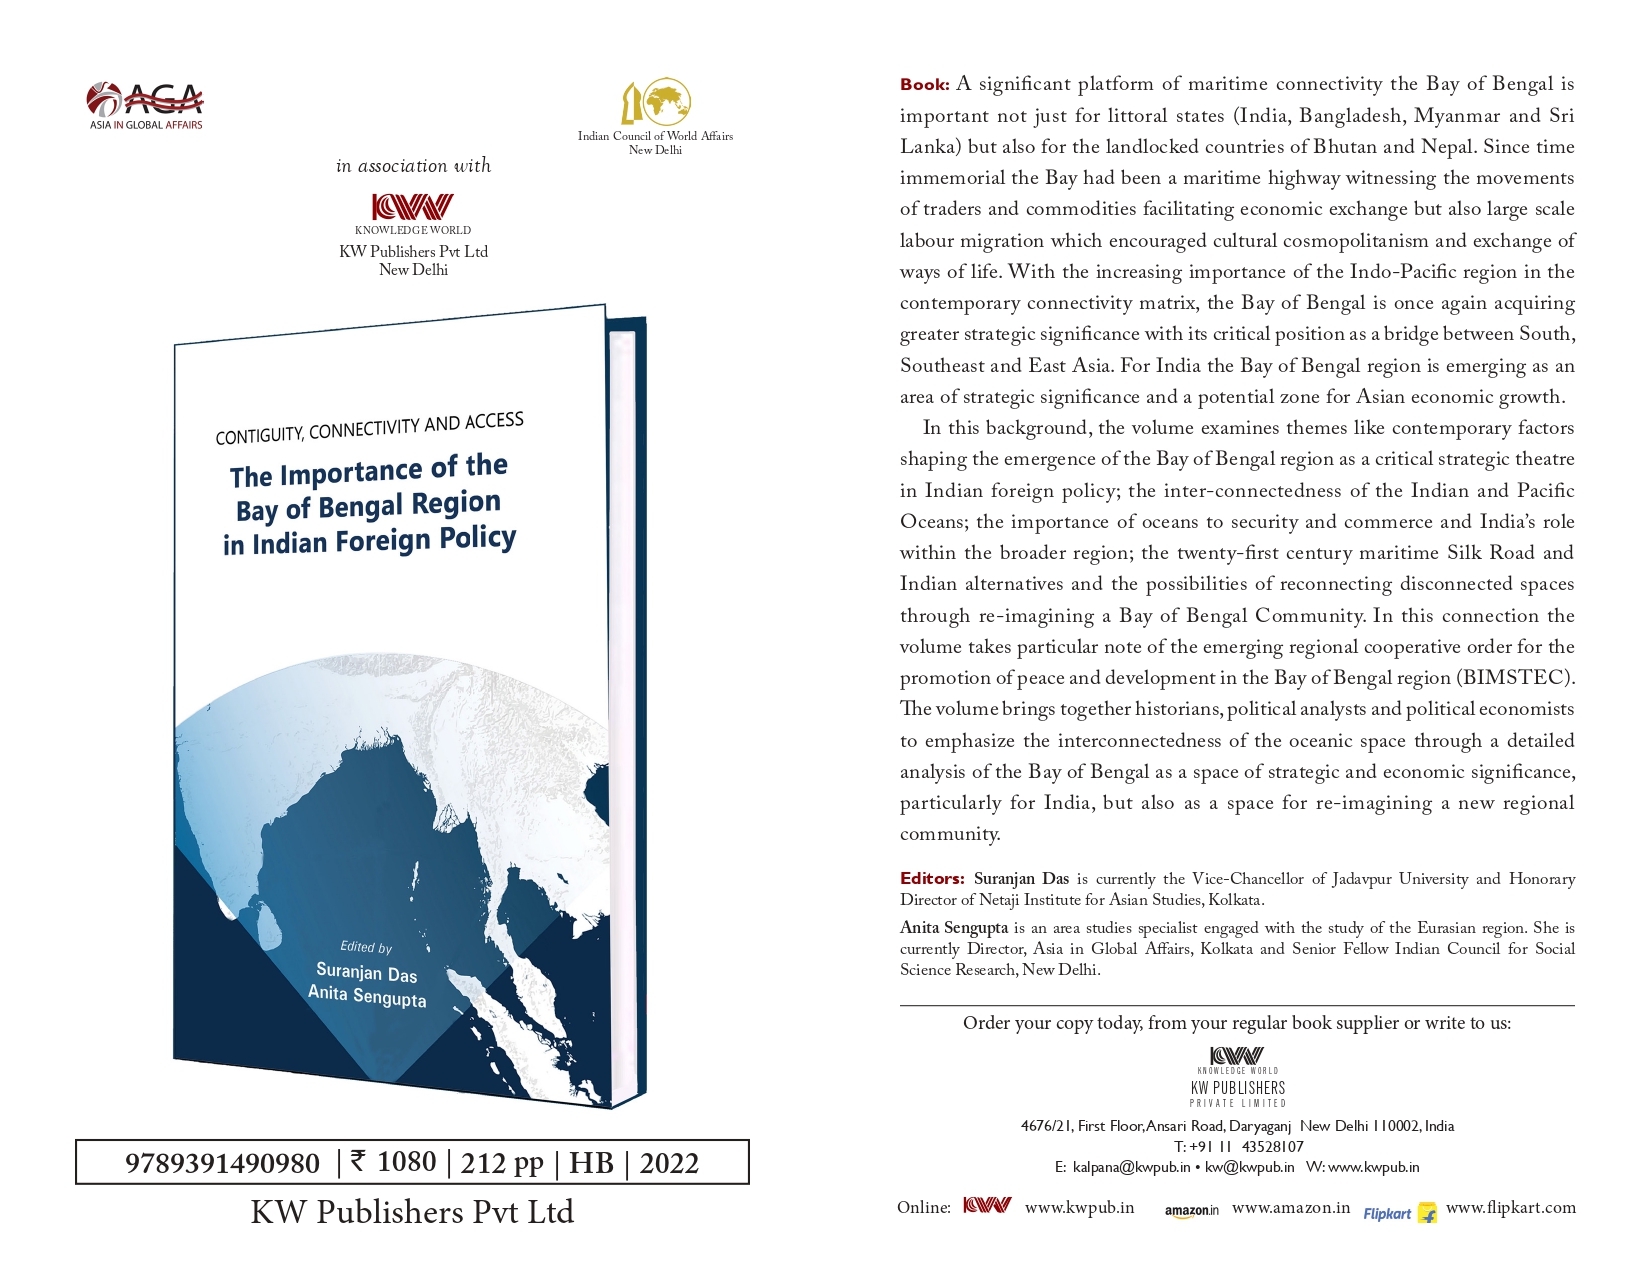  Asia in Global Affairs publishes its second volume in collaboration with Netaji Institute of Asian Studies.